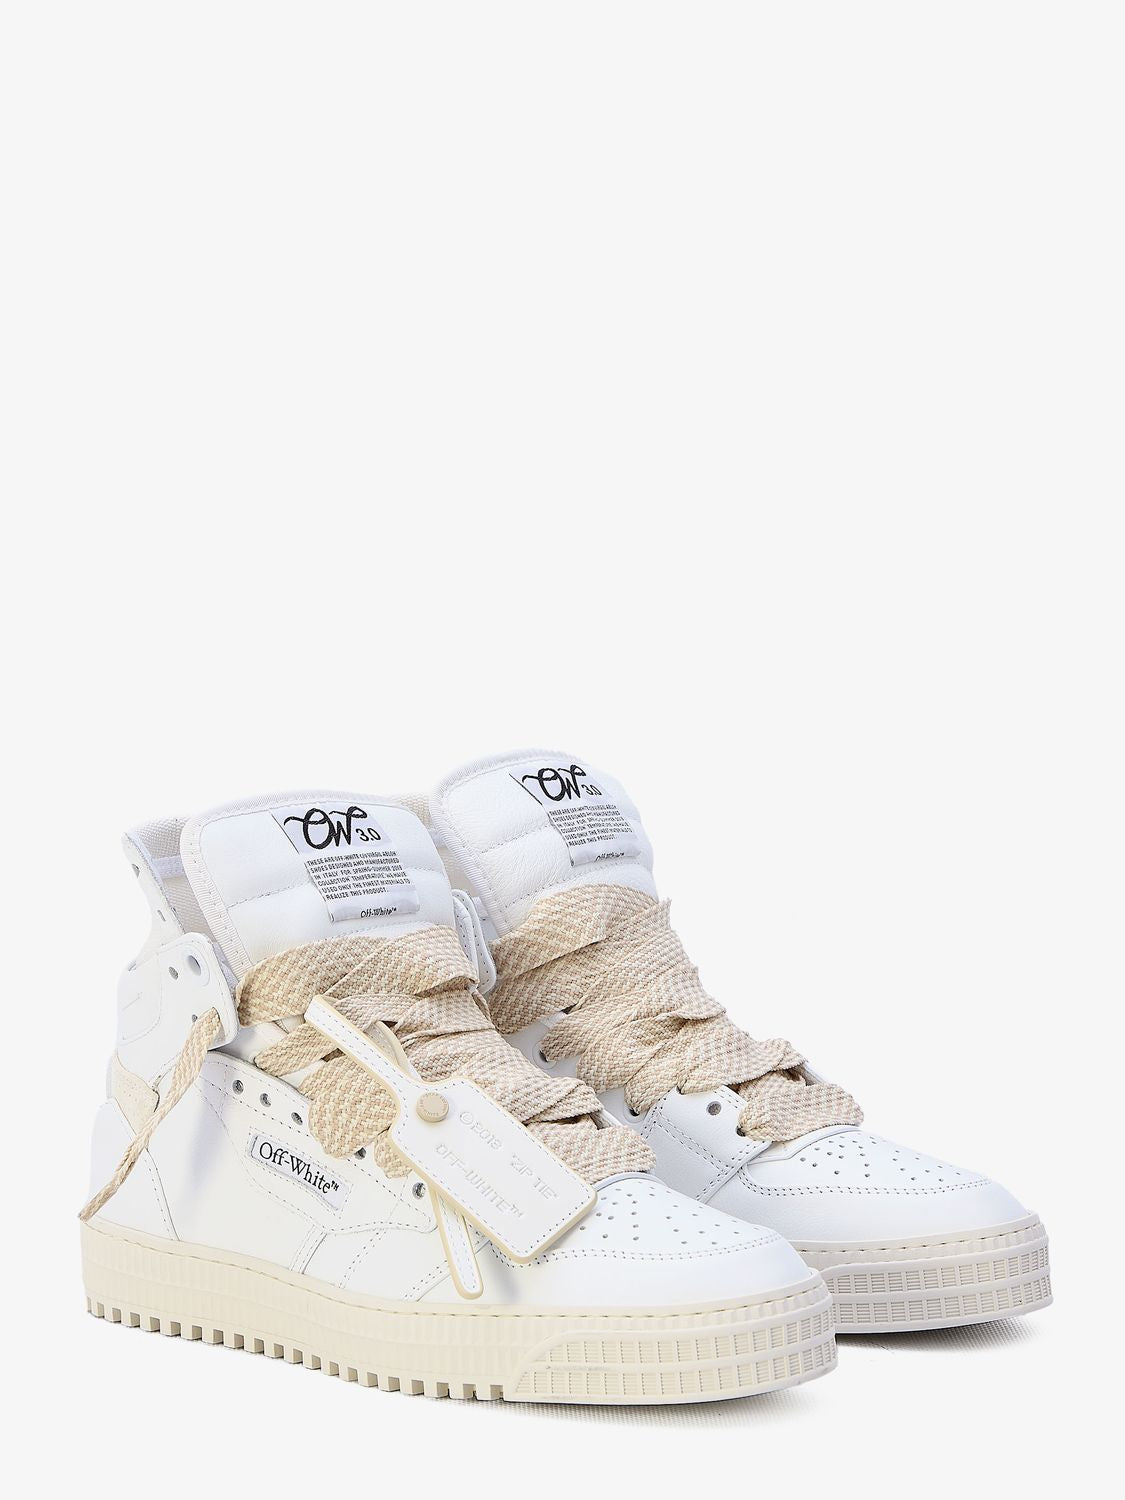 OFF-WHITE Men's White Leather Sneaker with Cream Rubber Sole and Detachable Zip-Tie Detail